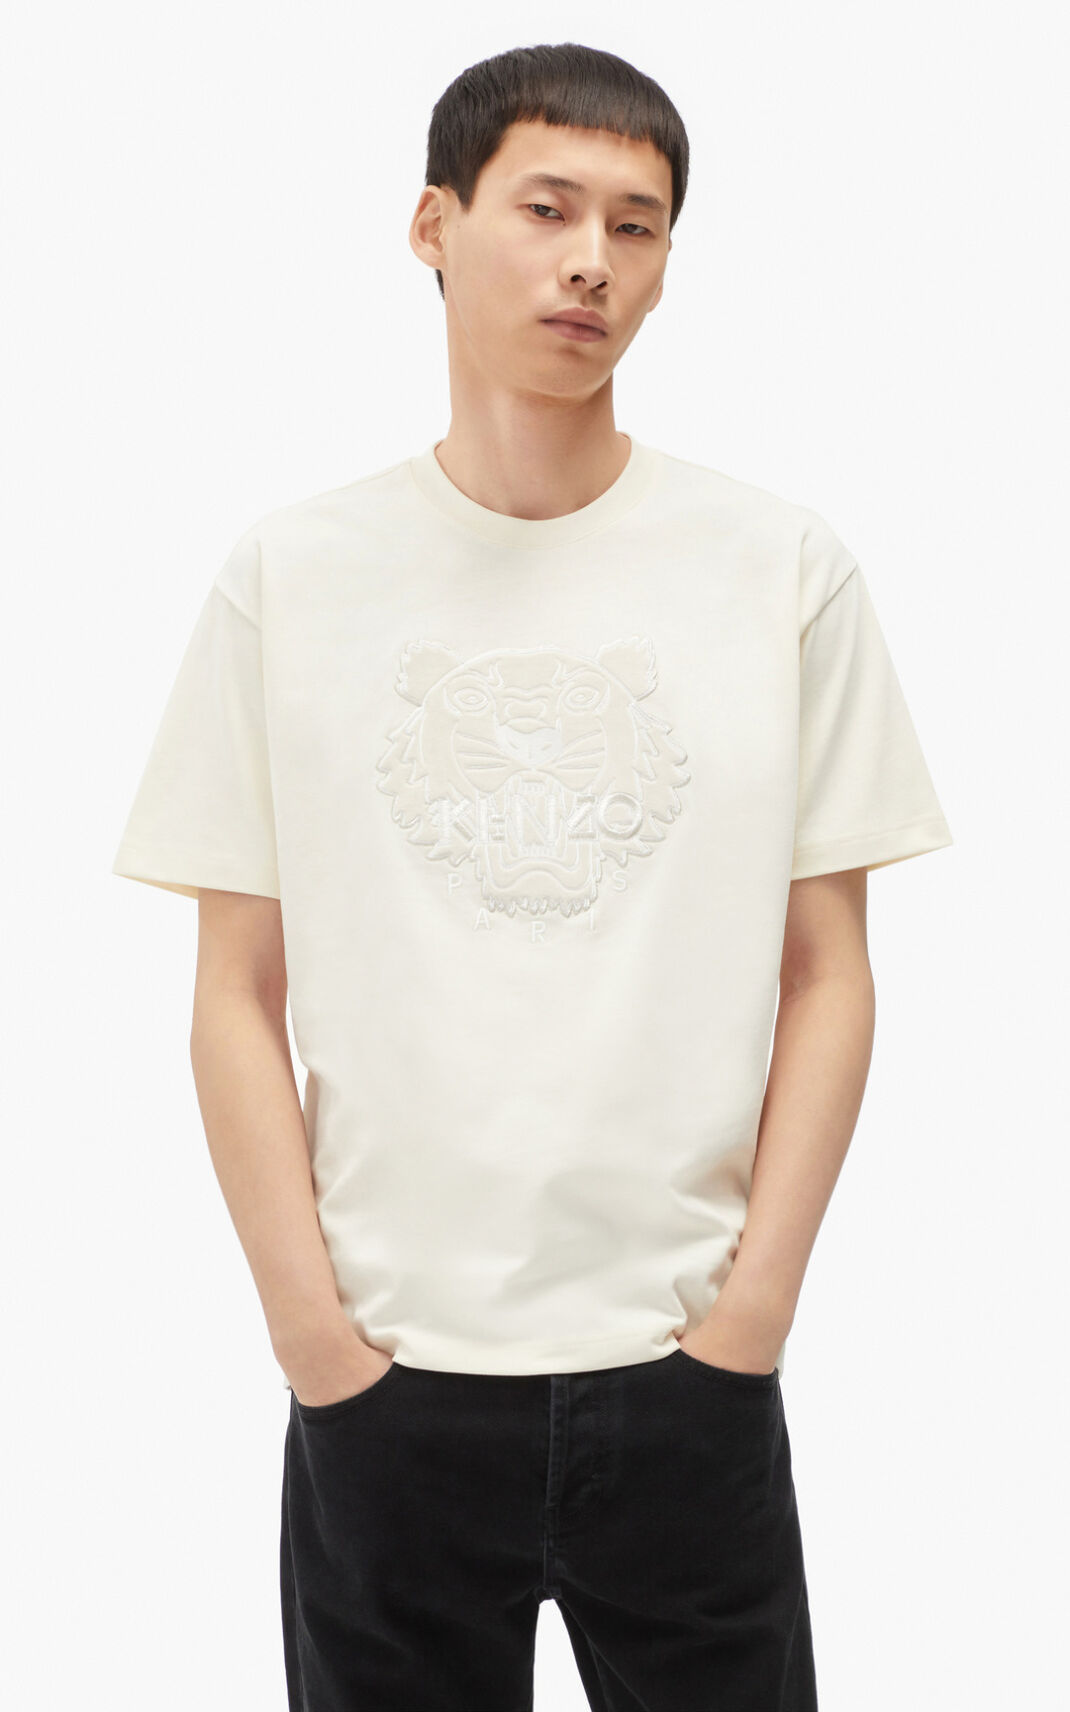 Kenzo The Winter Capsule Tiger T Shirt White For Mens 9502FOQMX